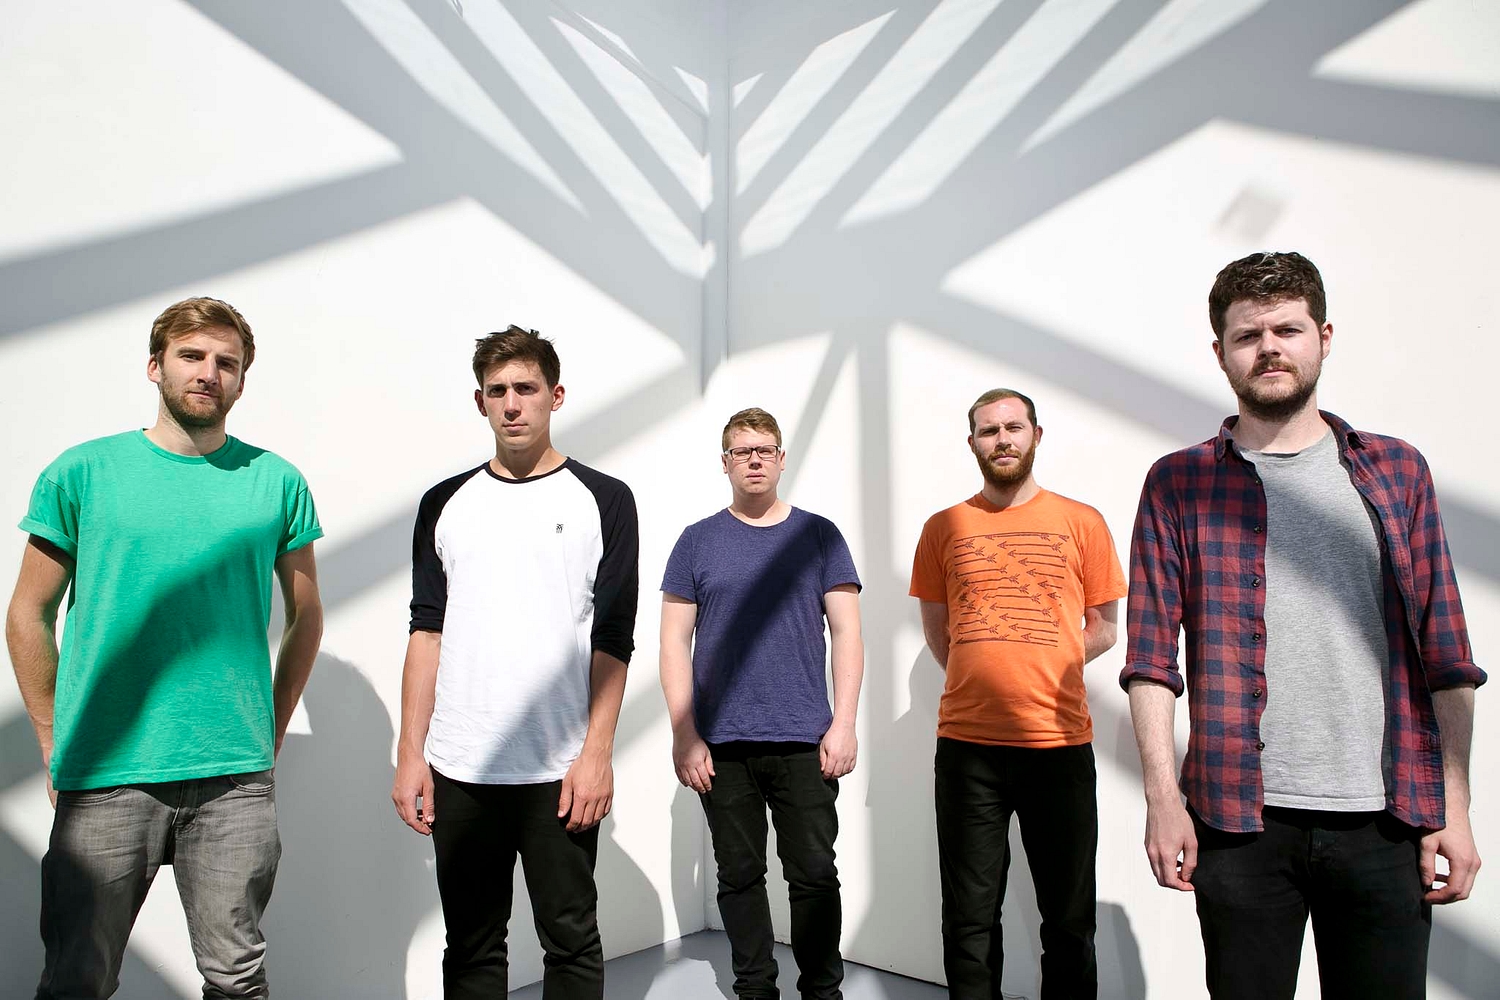 We Were Promised Jetpacks and The Twilight Sad to play King Tut’s 25th Birthday shows